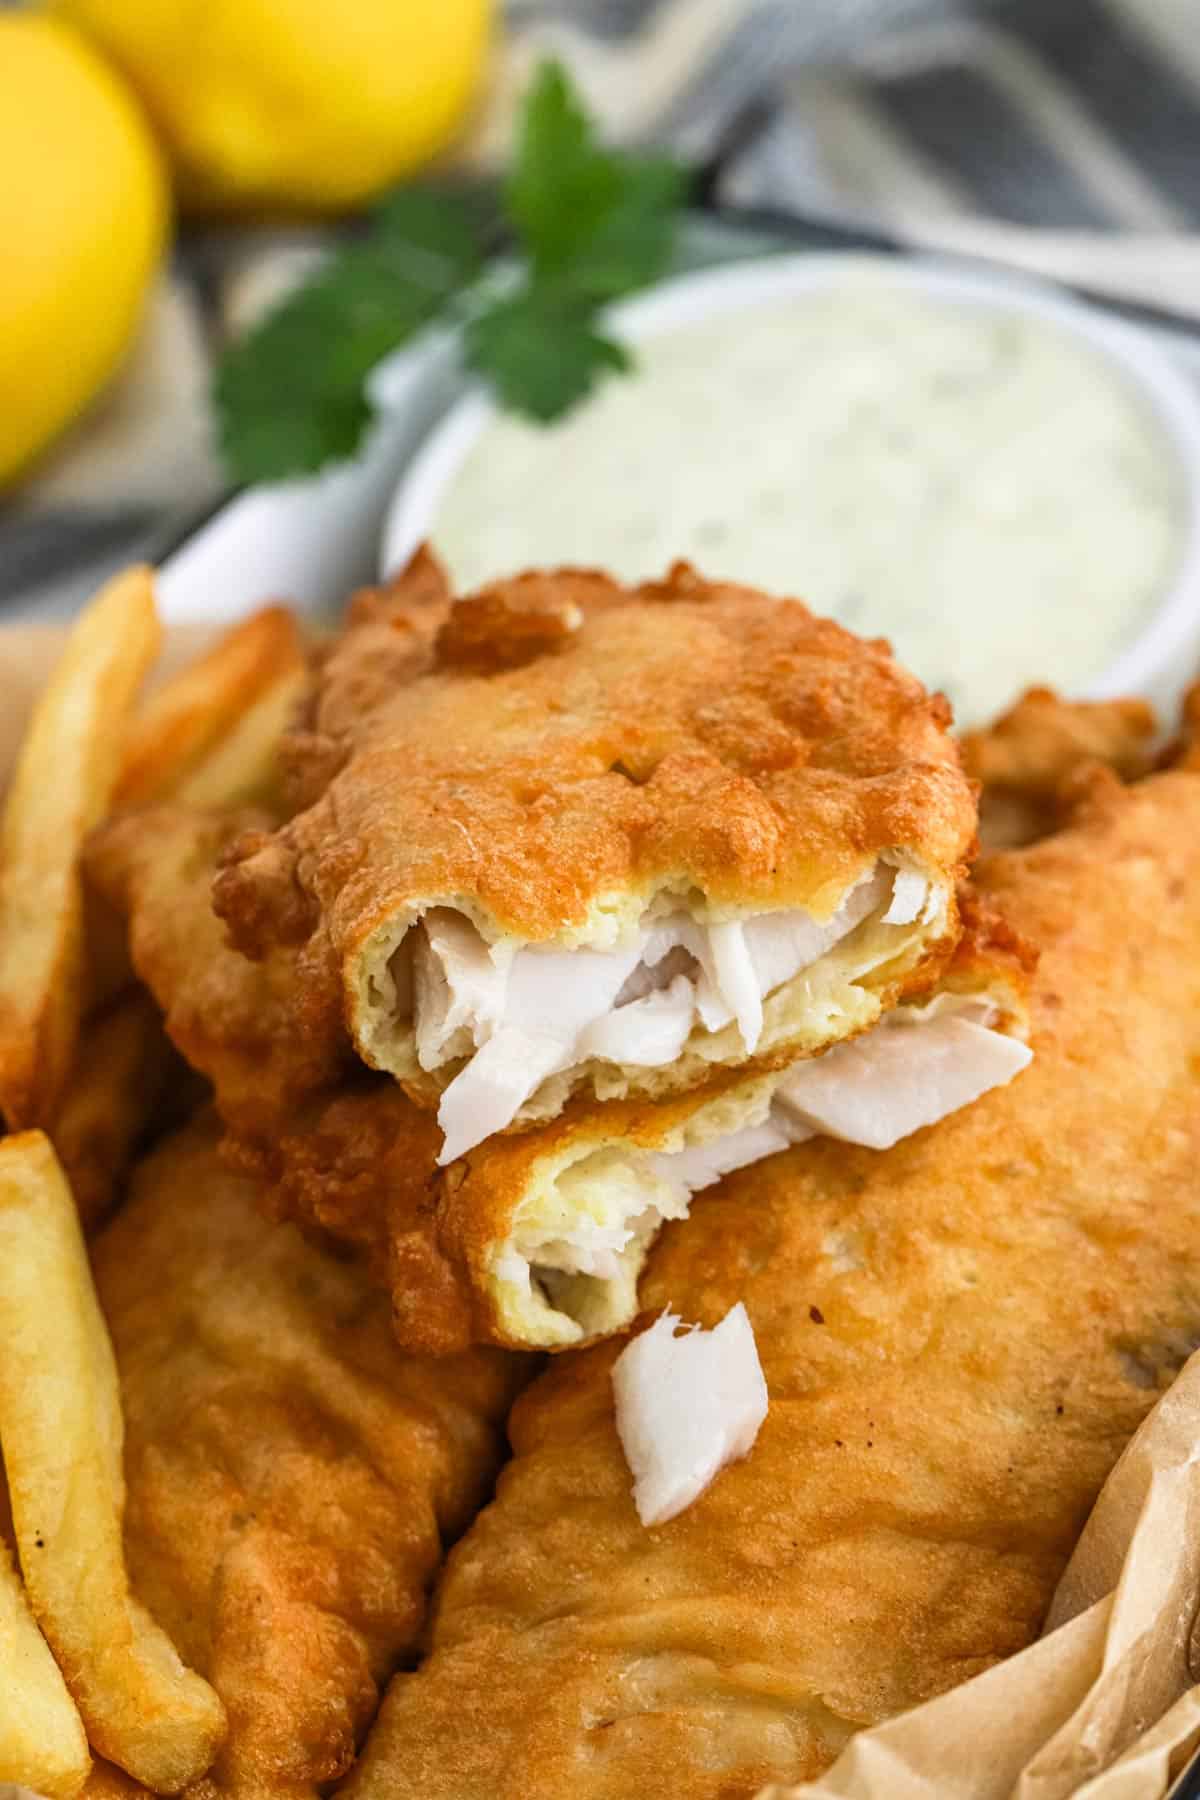 Fish and chips on a plate with the fish broken in half to show inside.